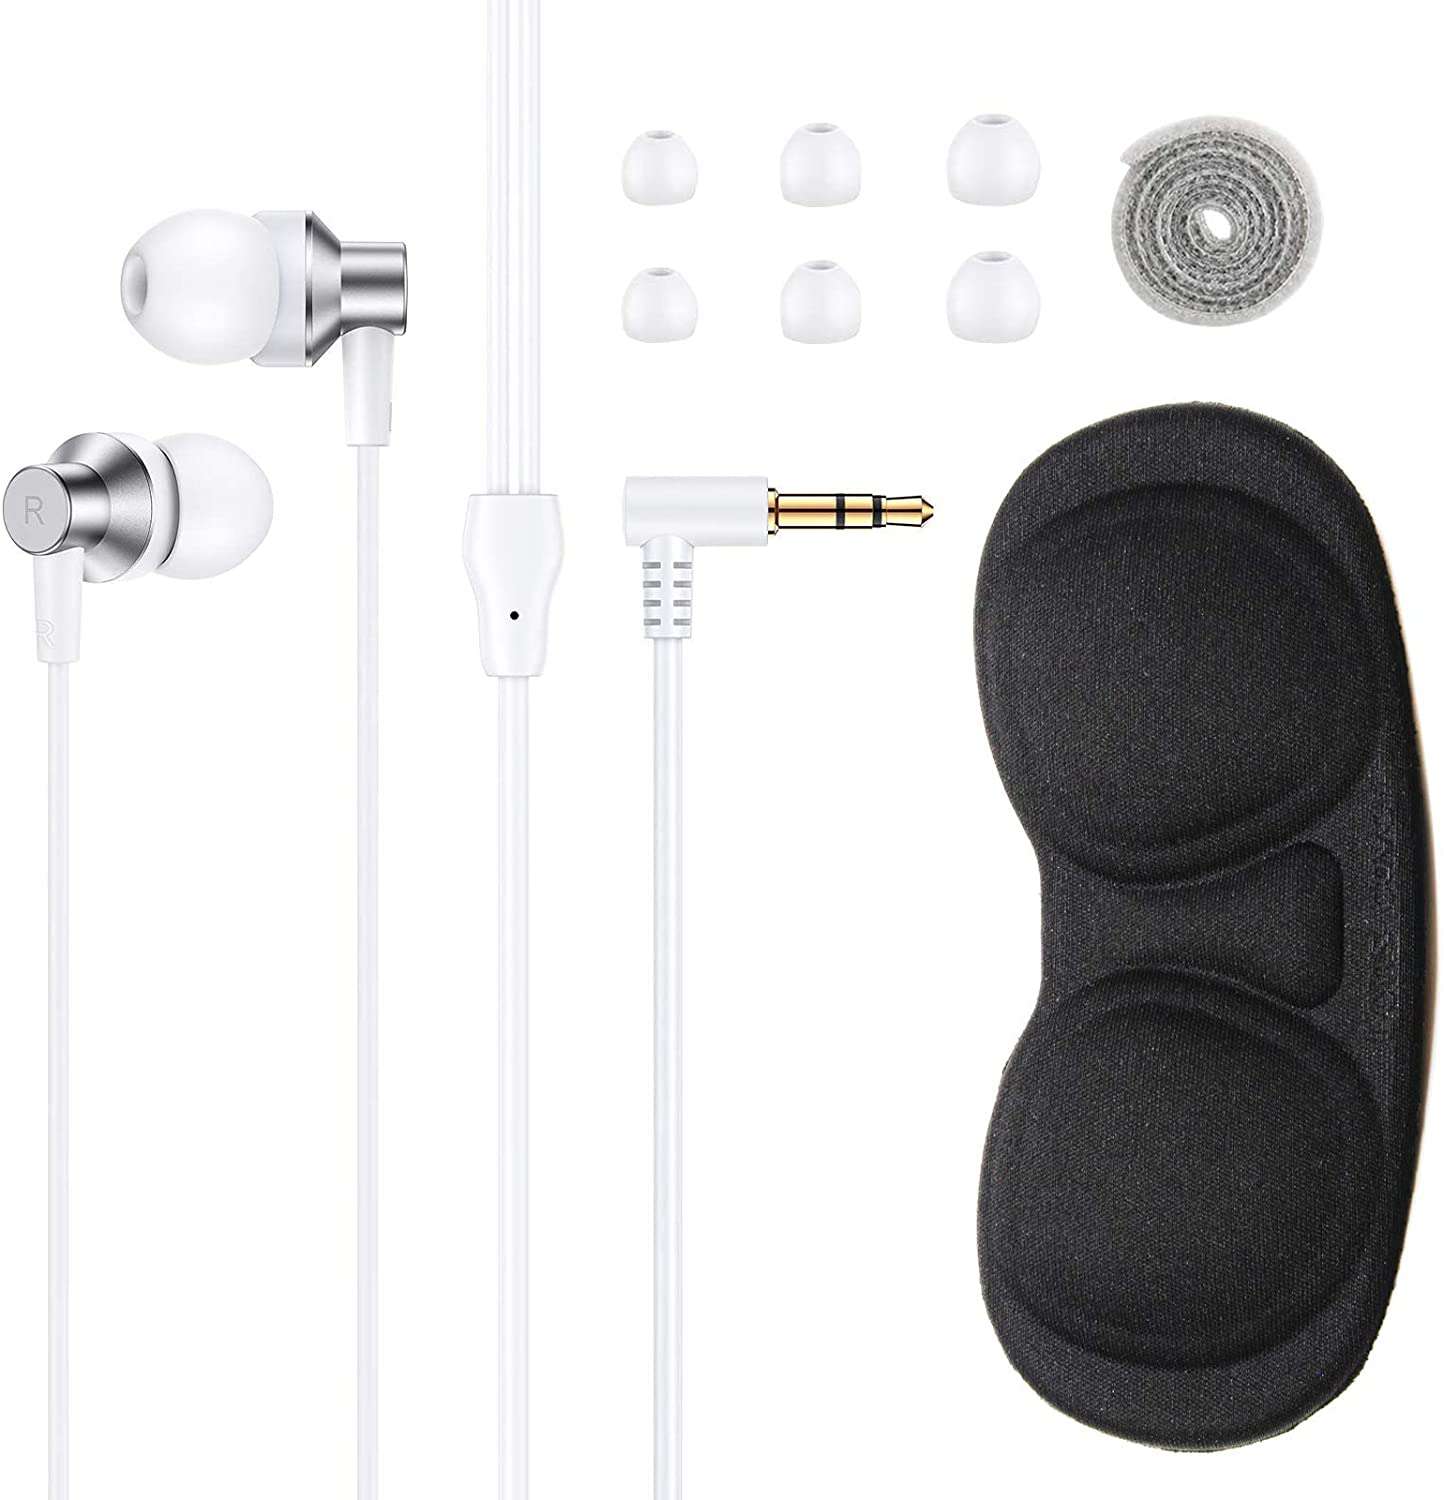 The package includes one pair of headphones, three pairs of ear tips, one Velcro strap, and one VR cushion pad.